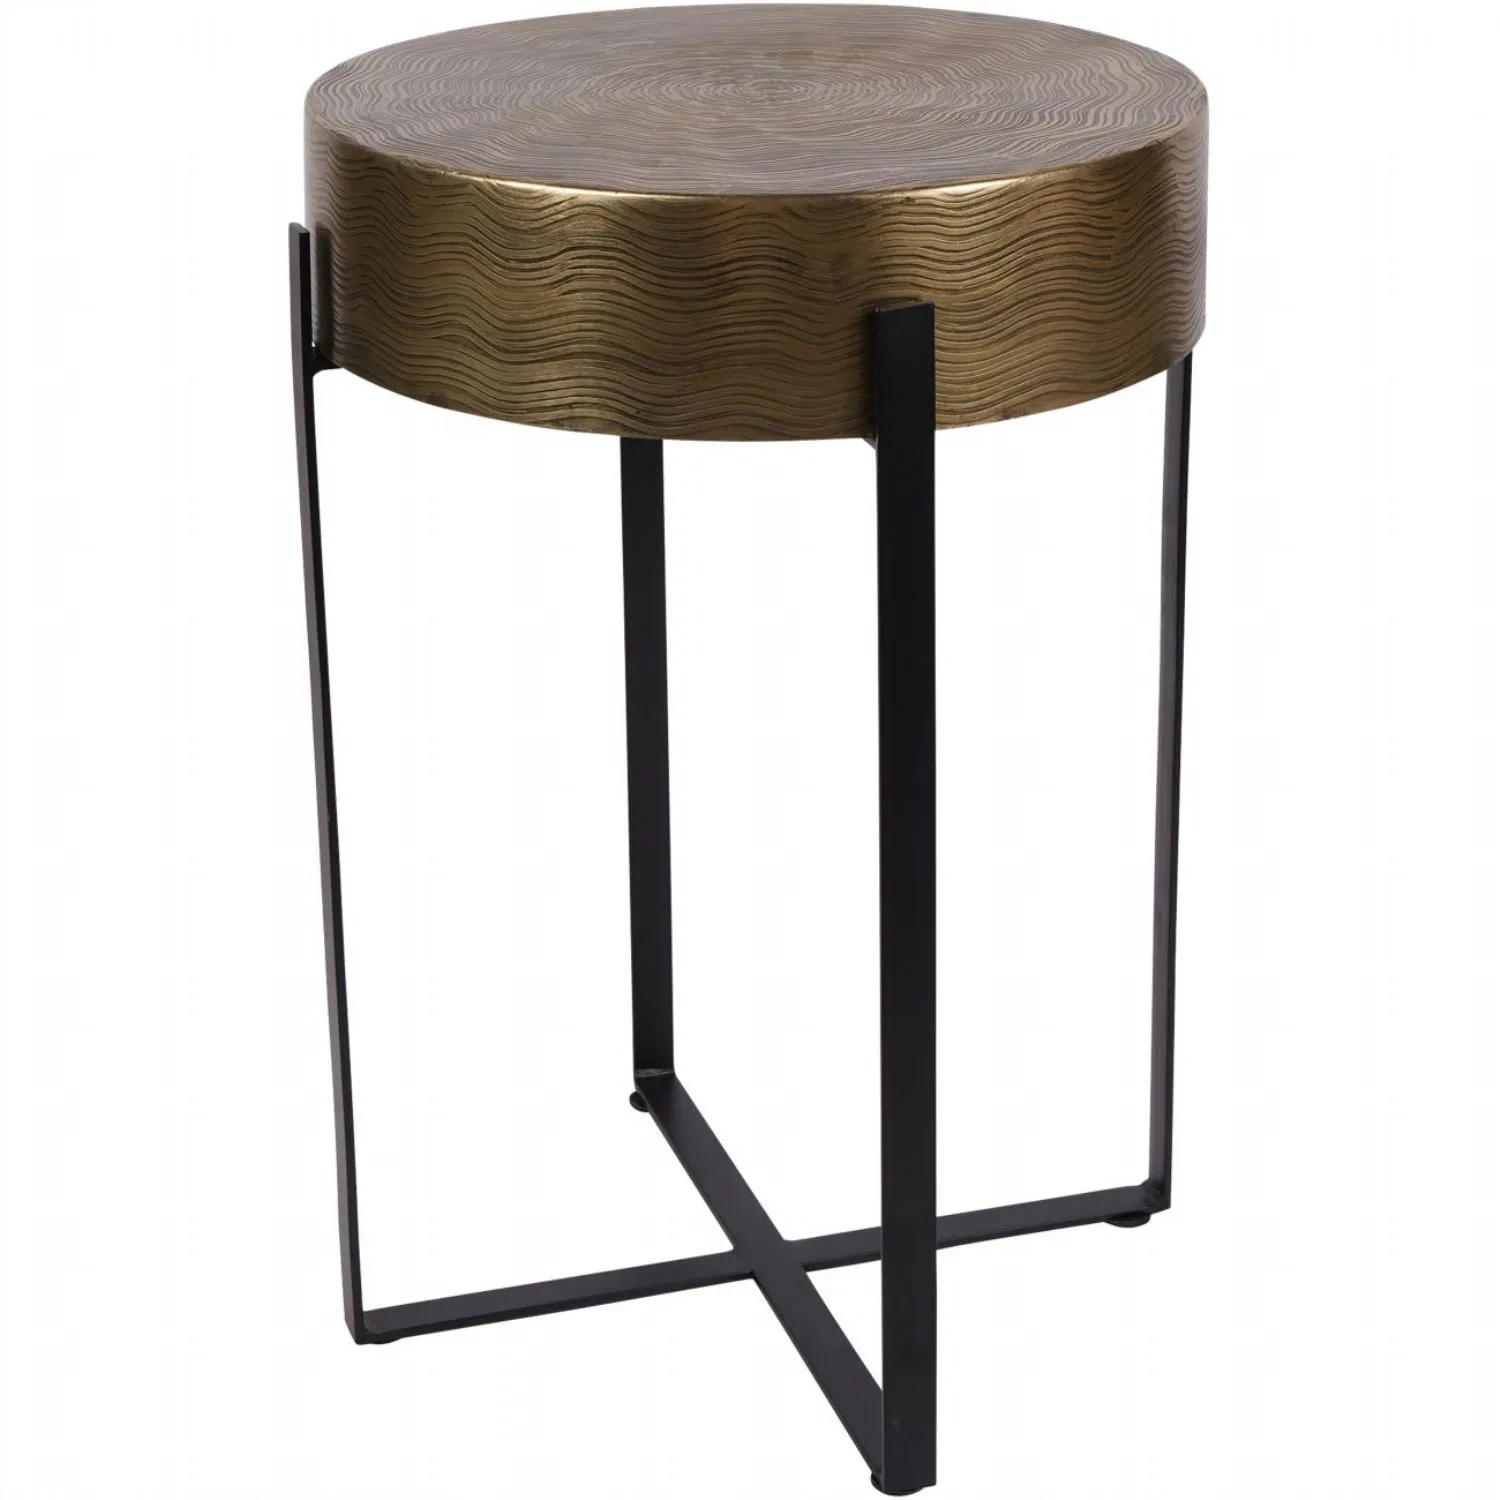 Etched Brass 40cm Round Side Lamp Table on Black Metal Stand